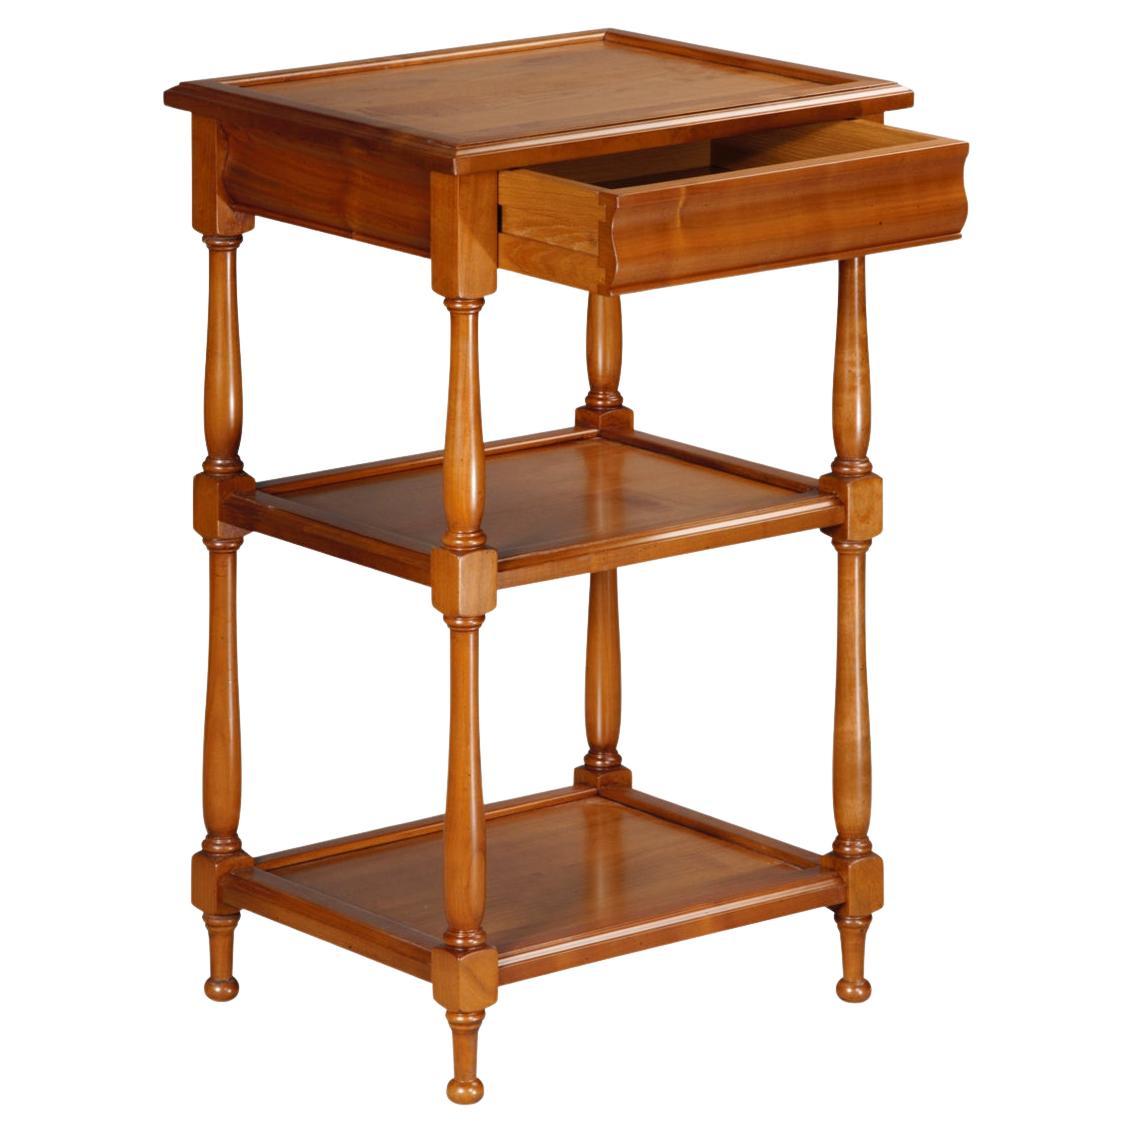 Louis Philippe Style Serving Table in Solid Cherry Wood, 1 Drawer and 2 Shelves For Sale